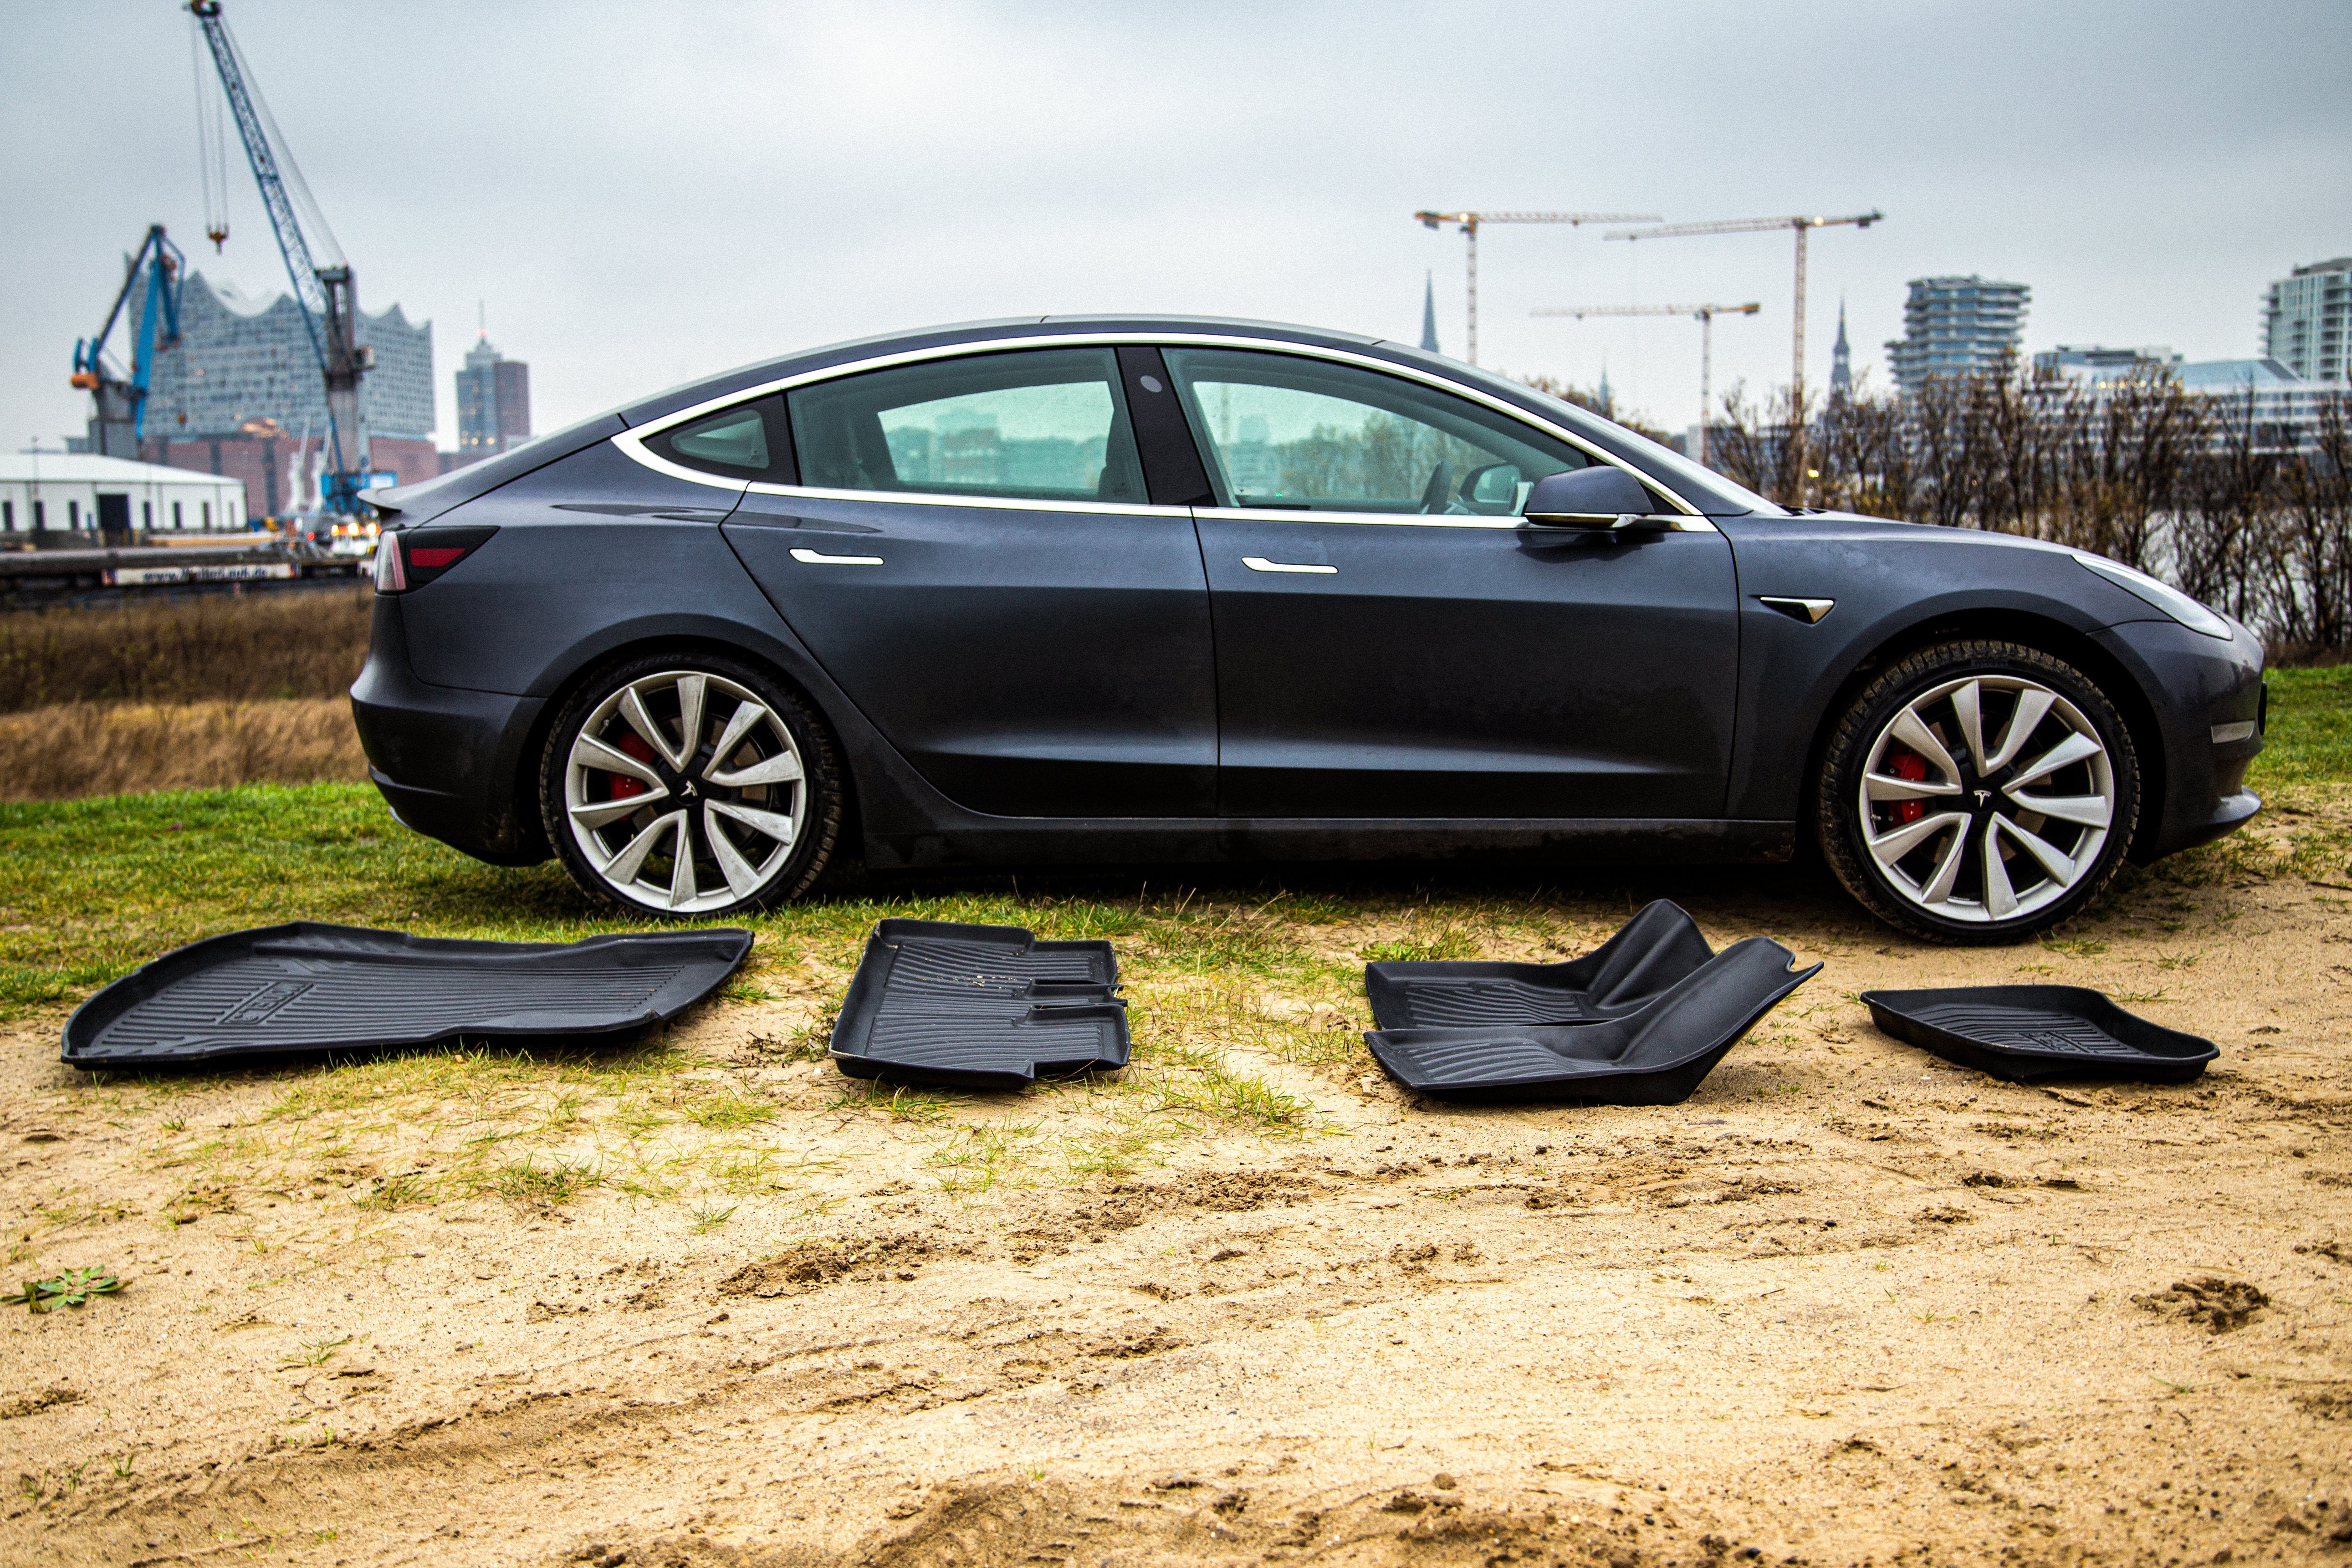 Sustainable accessories for your Tesla – Shop4Tesla